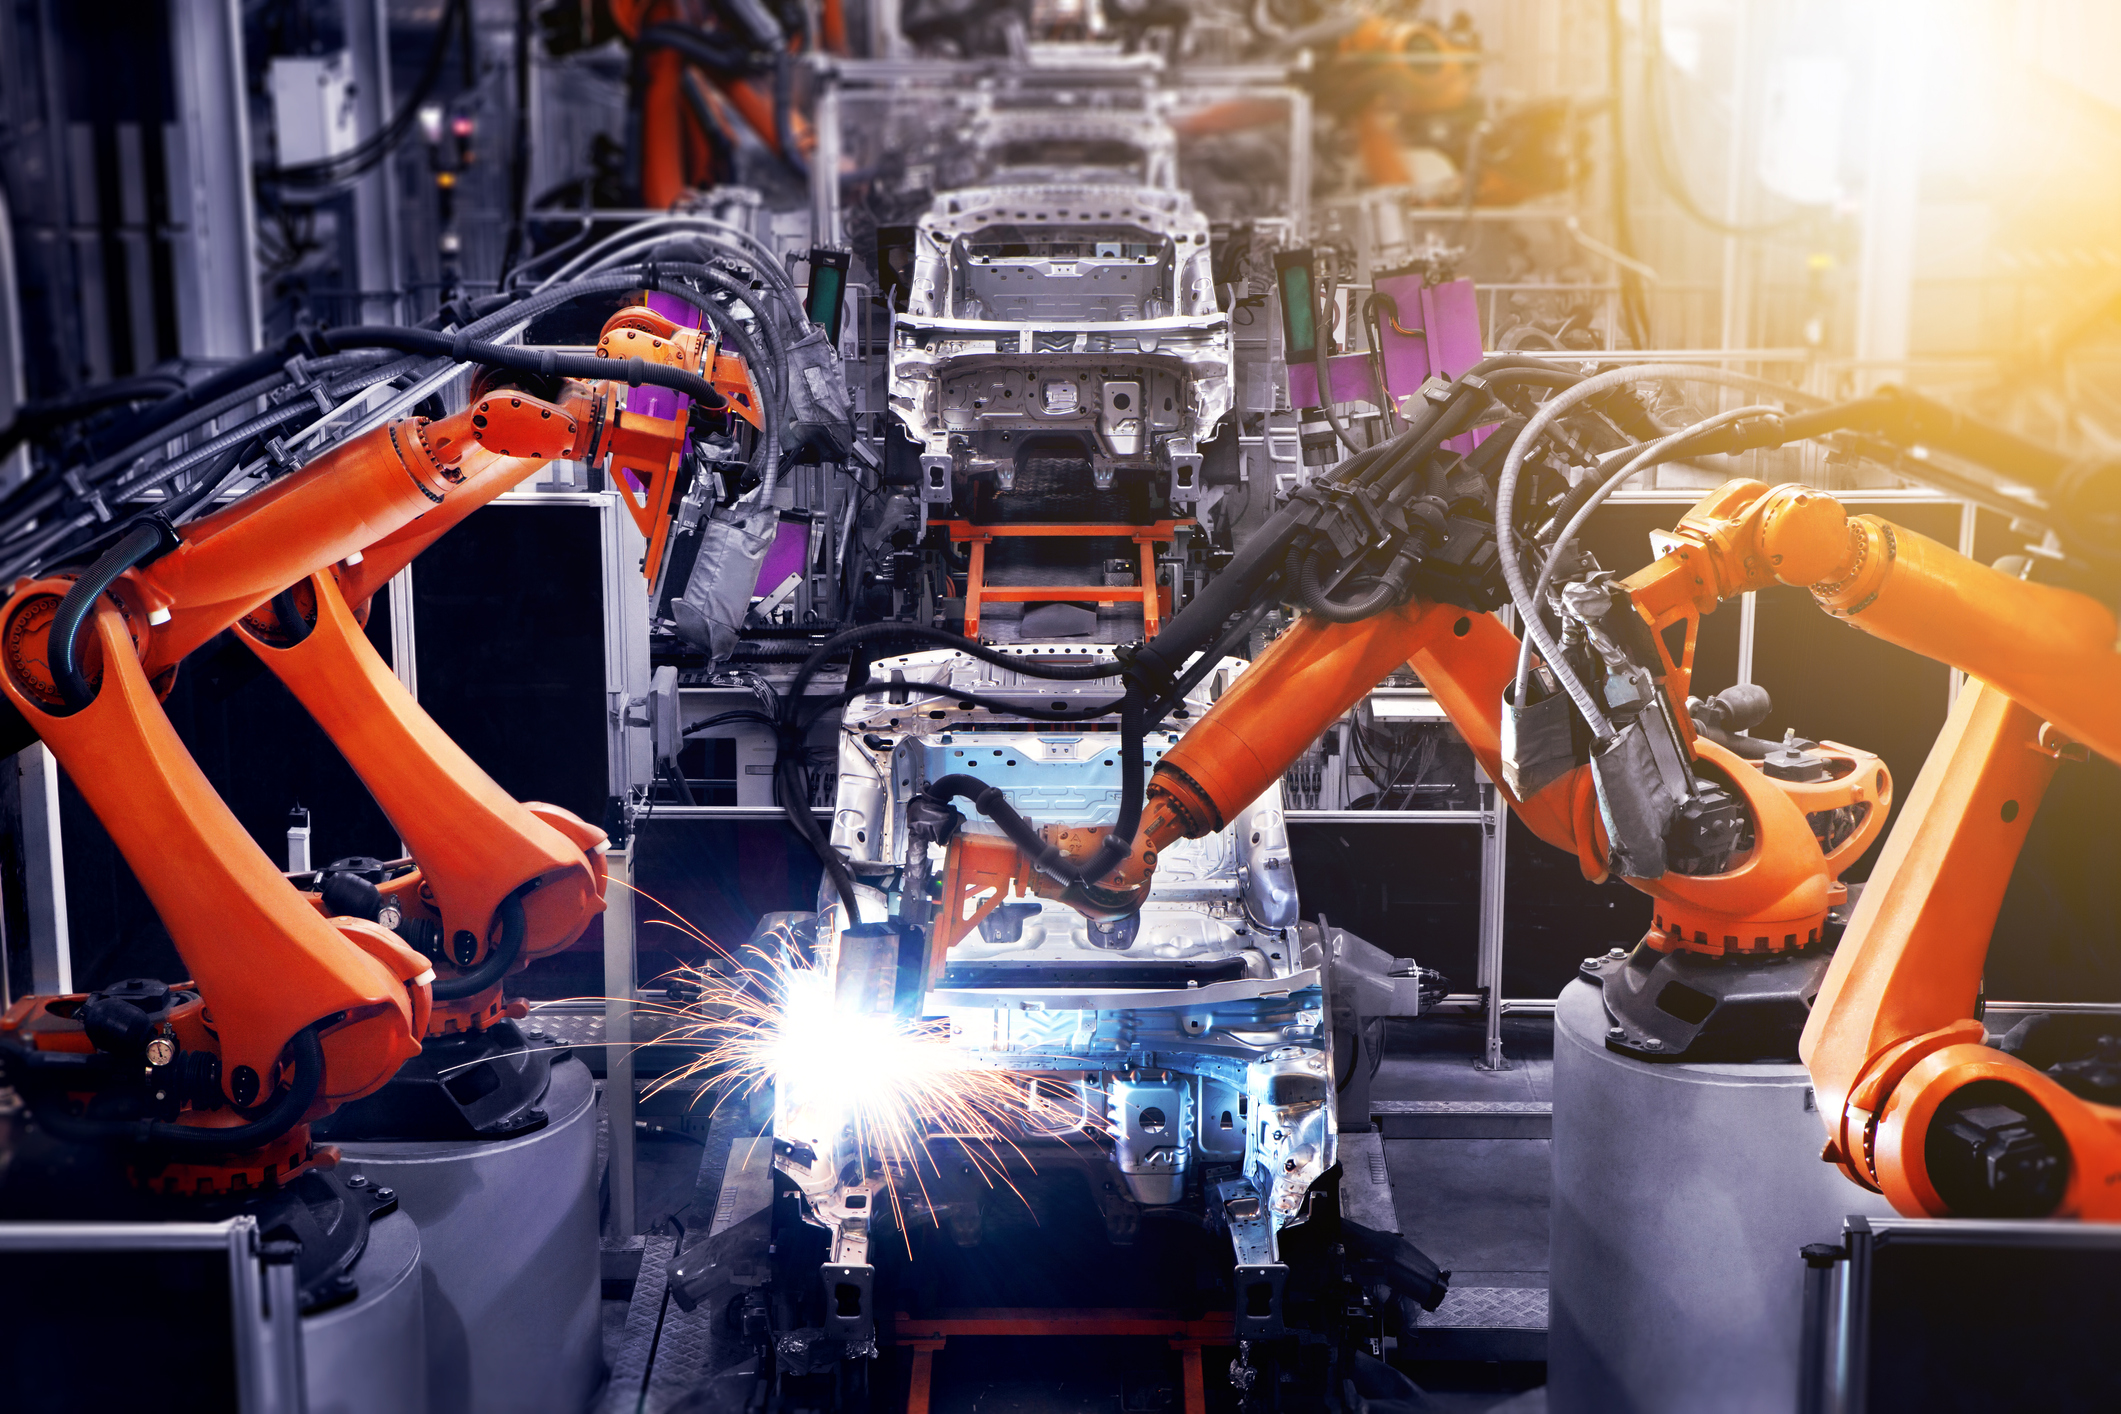 In the industrial production workshop, the robot arm of the automobile production line is working